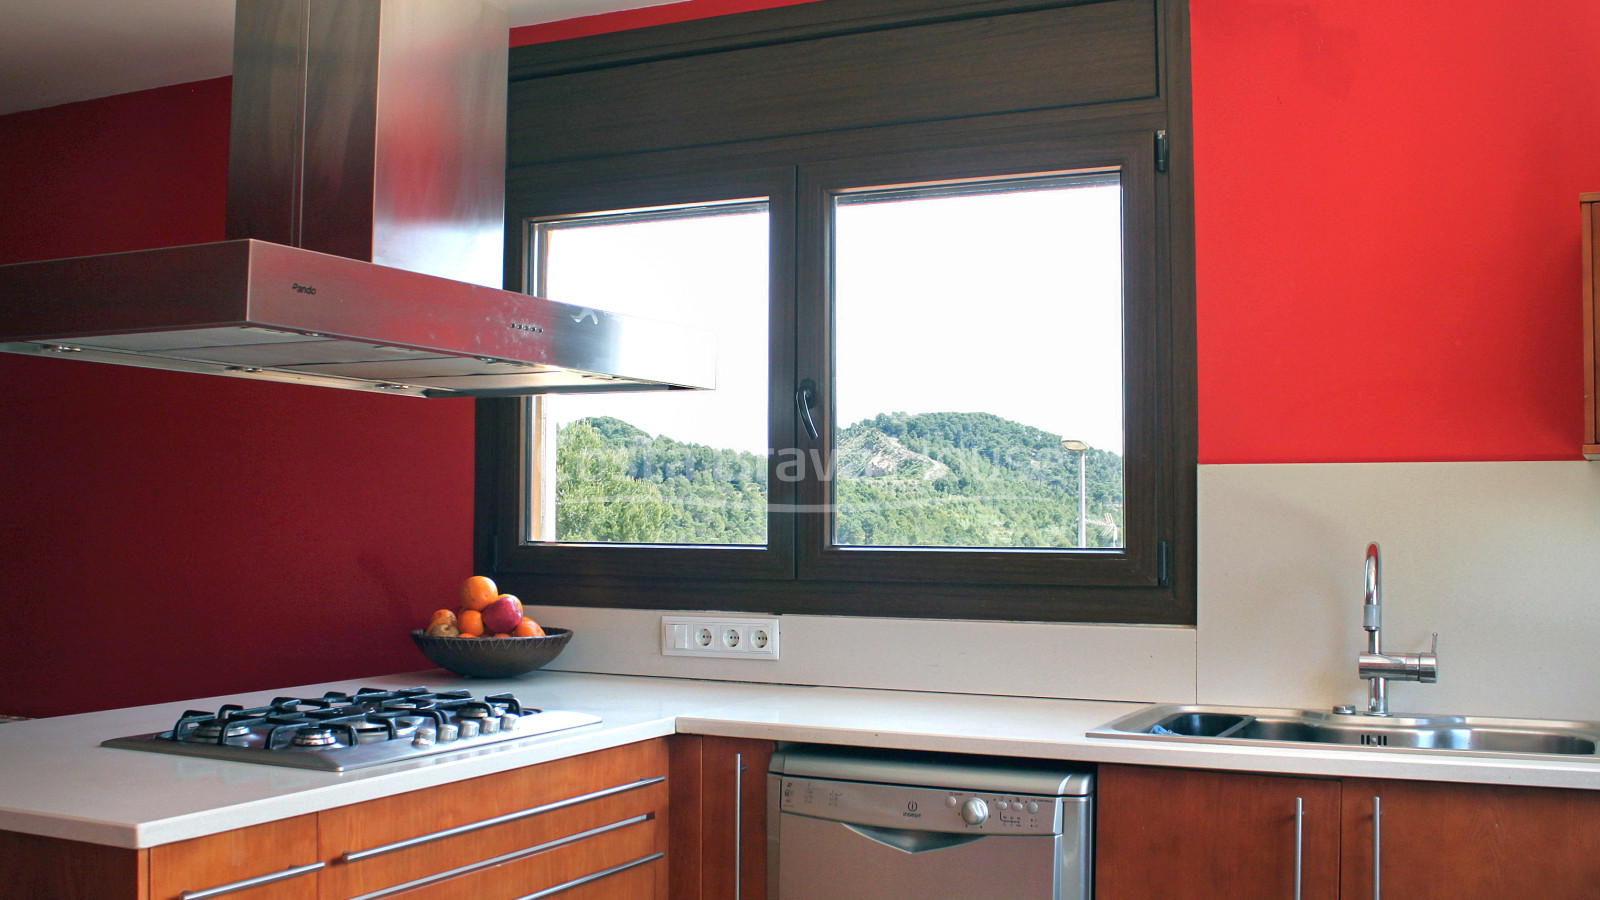 3 bedroom house with pool for sale in urbanization near Begur